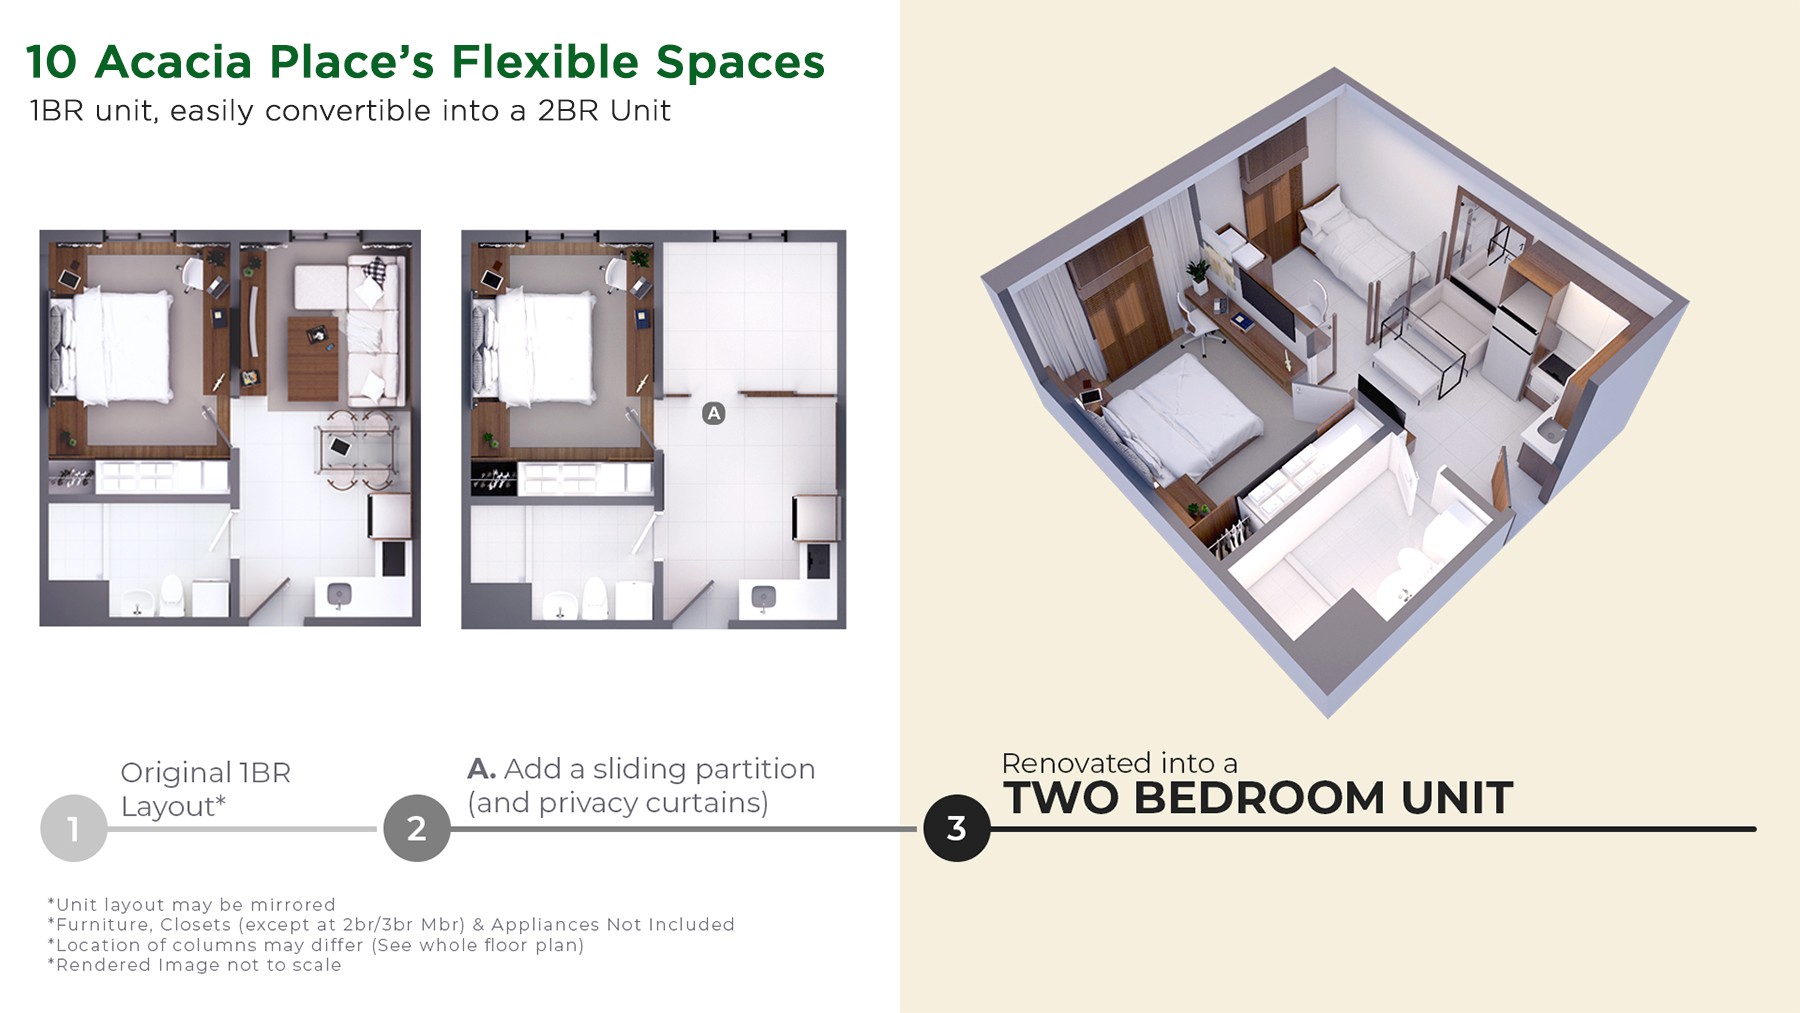 Livingsprings builds flexible spaces that grow with your needs